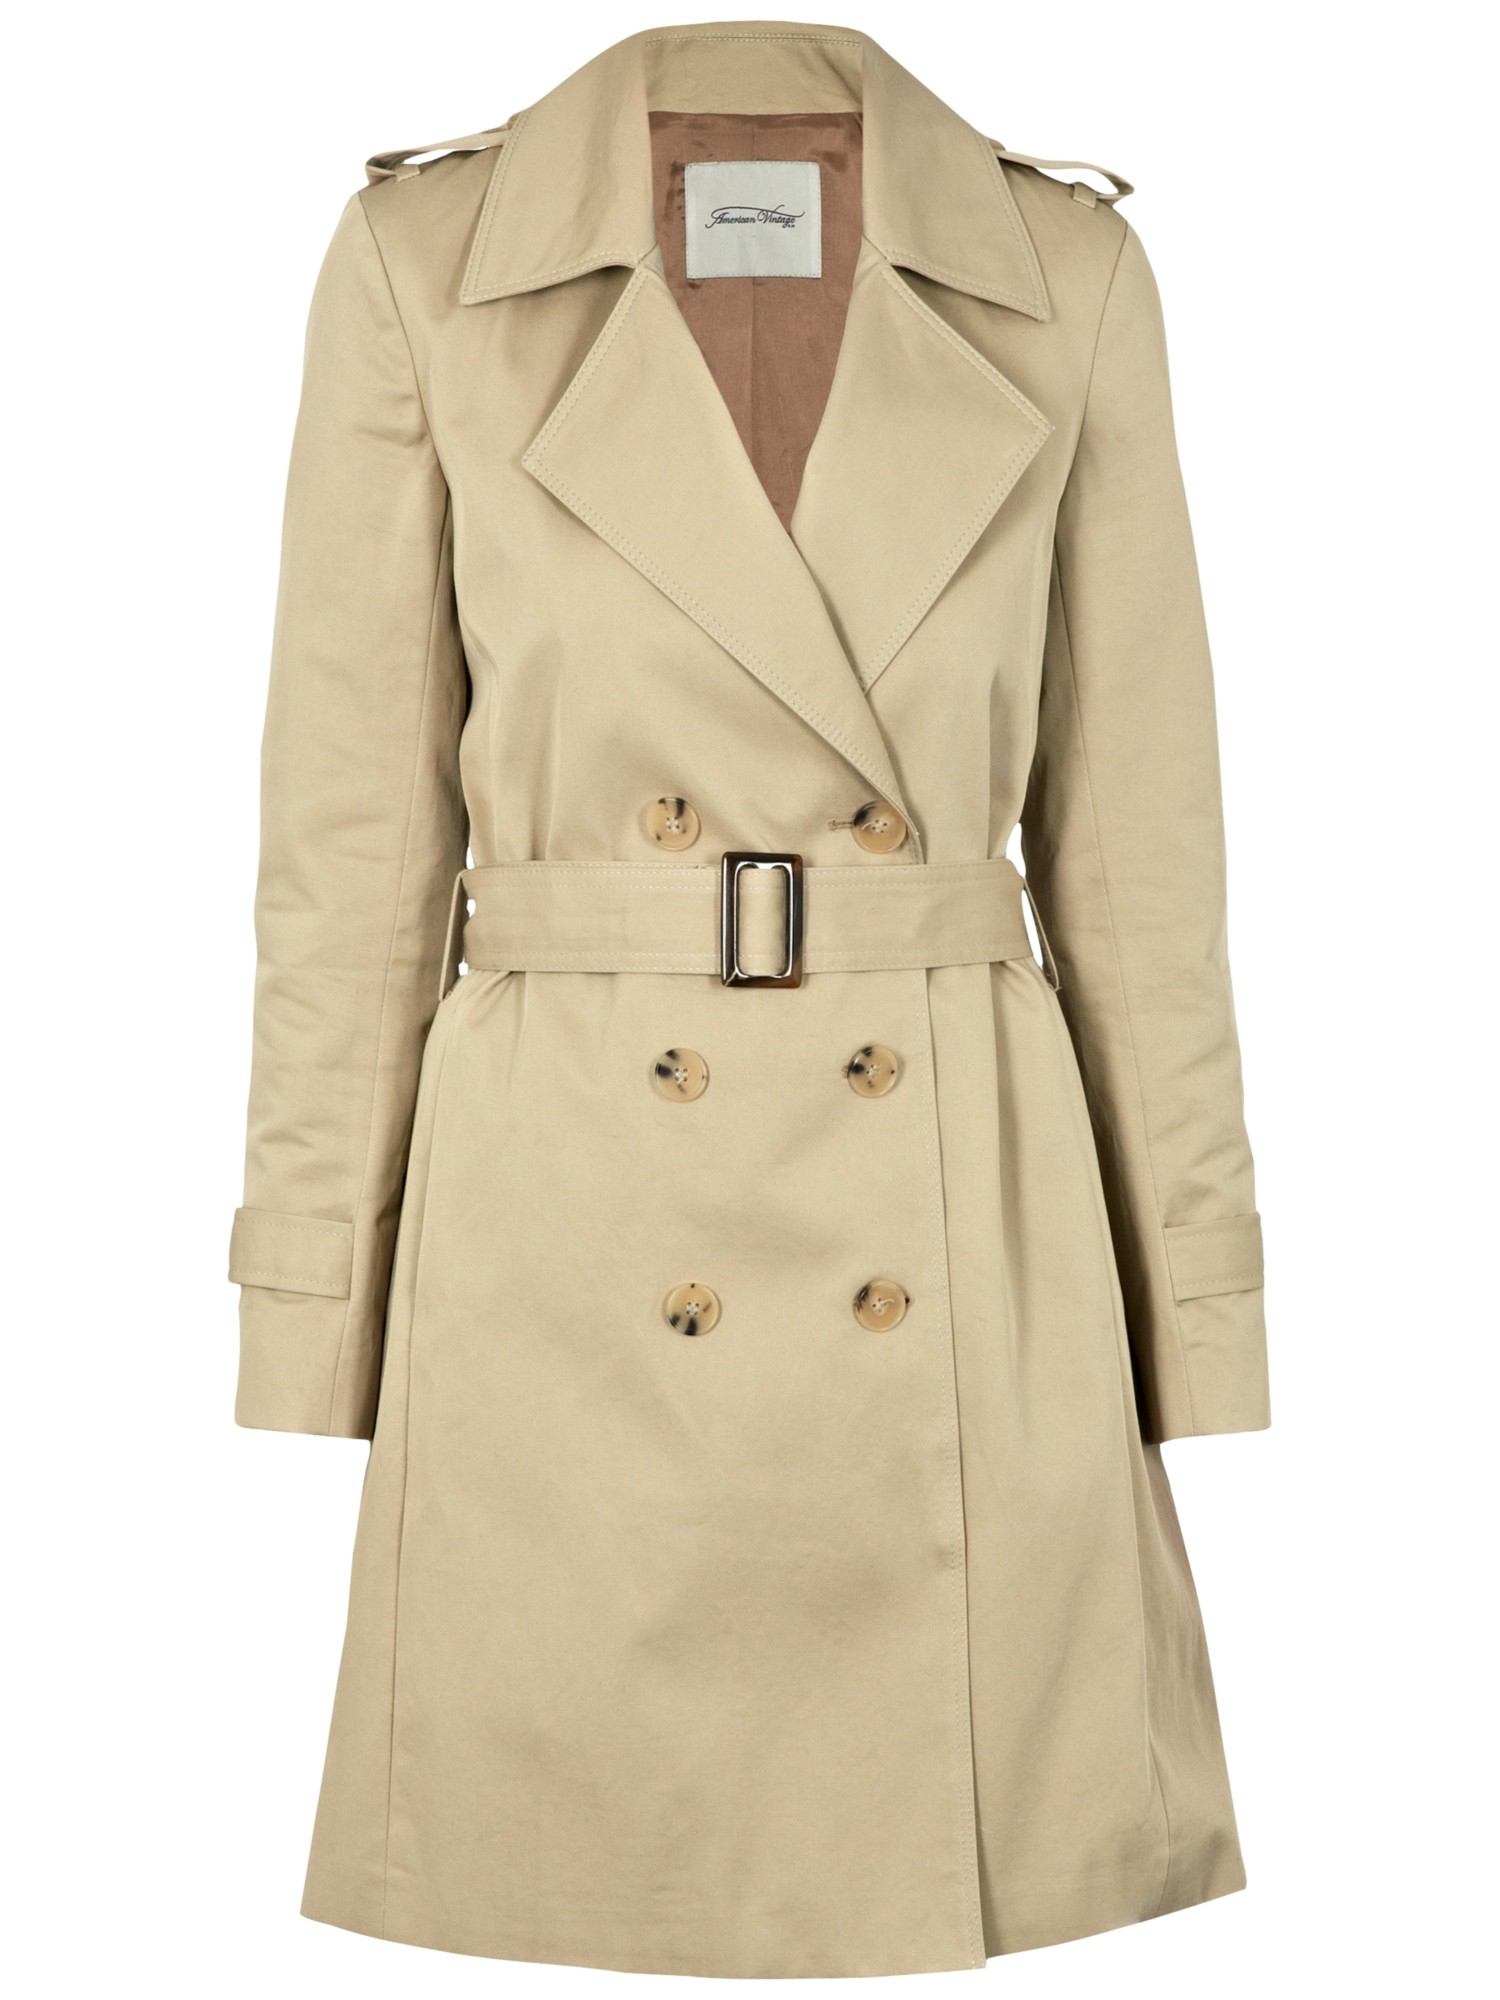 American vintage Supindale Trench Coat in Beige | Lyst